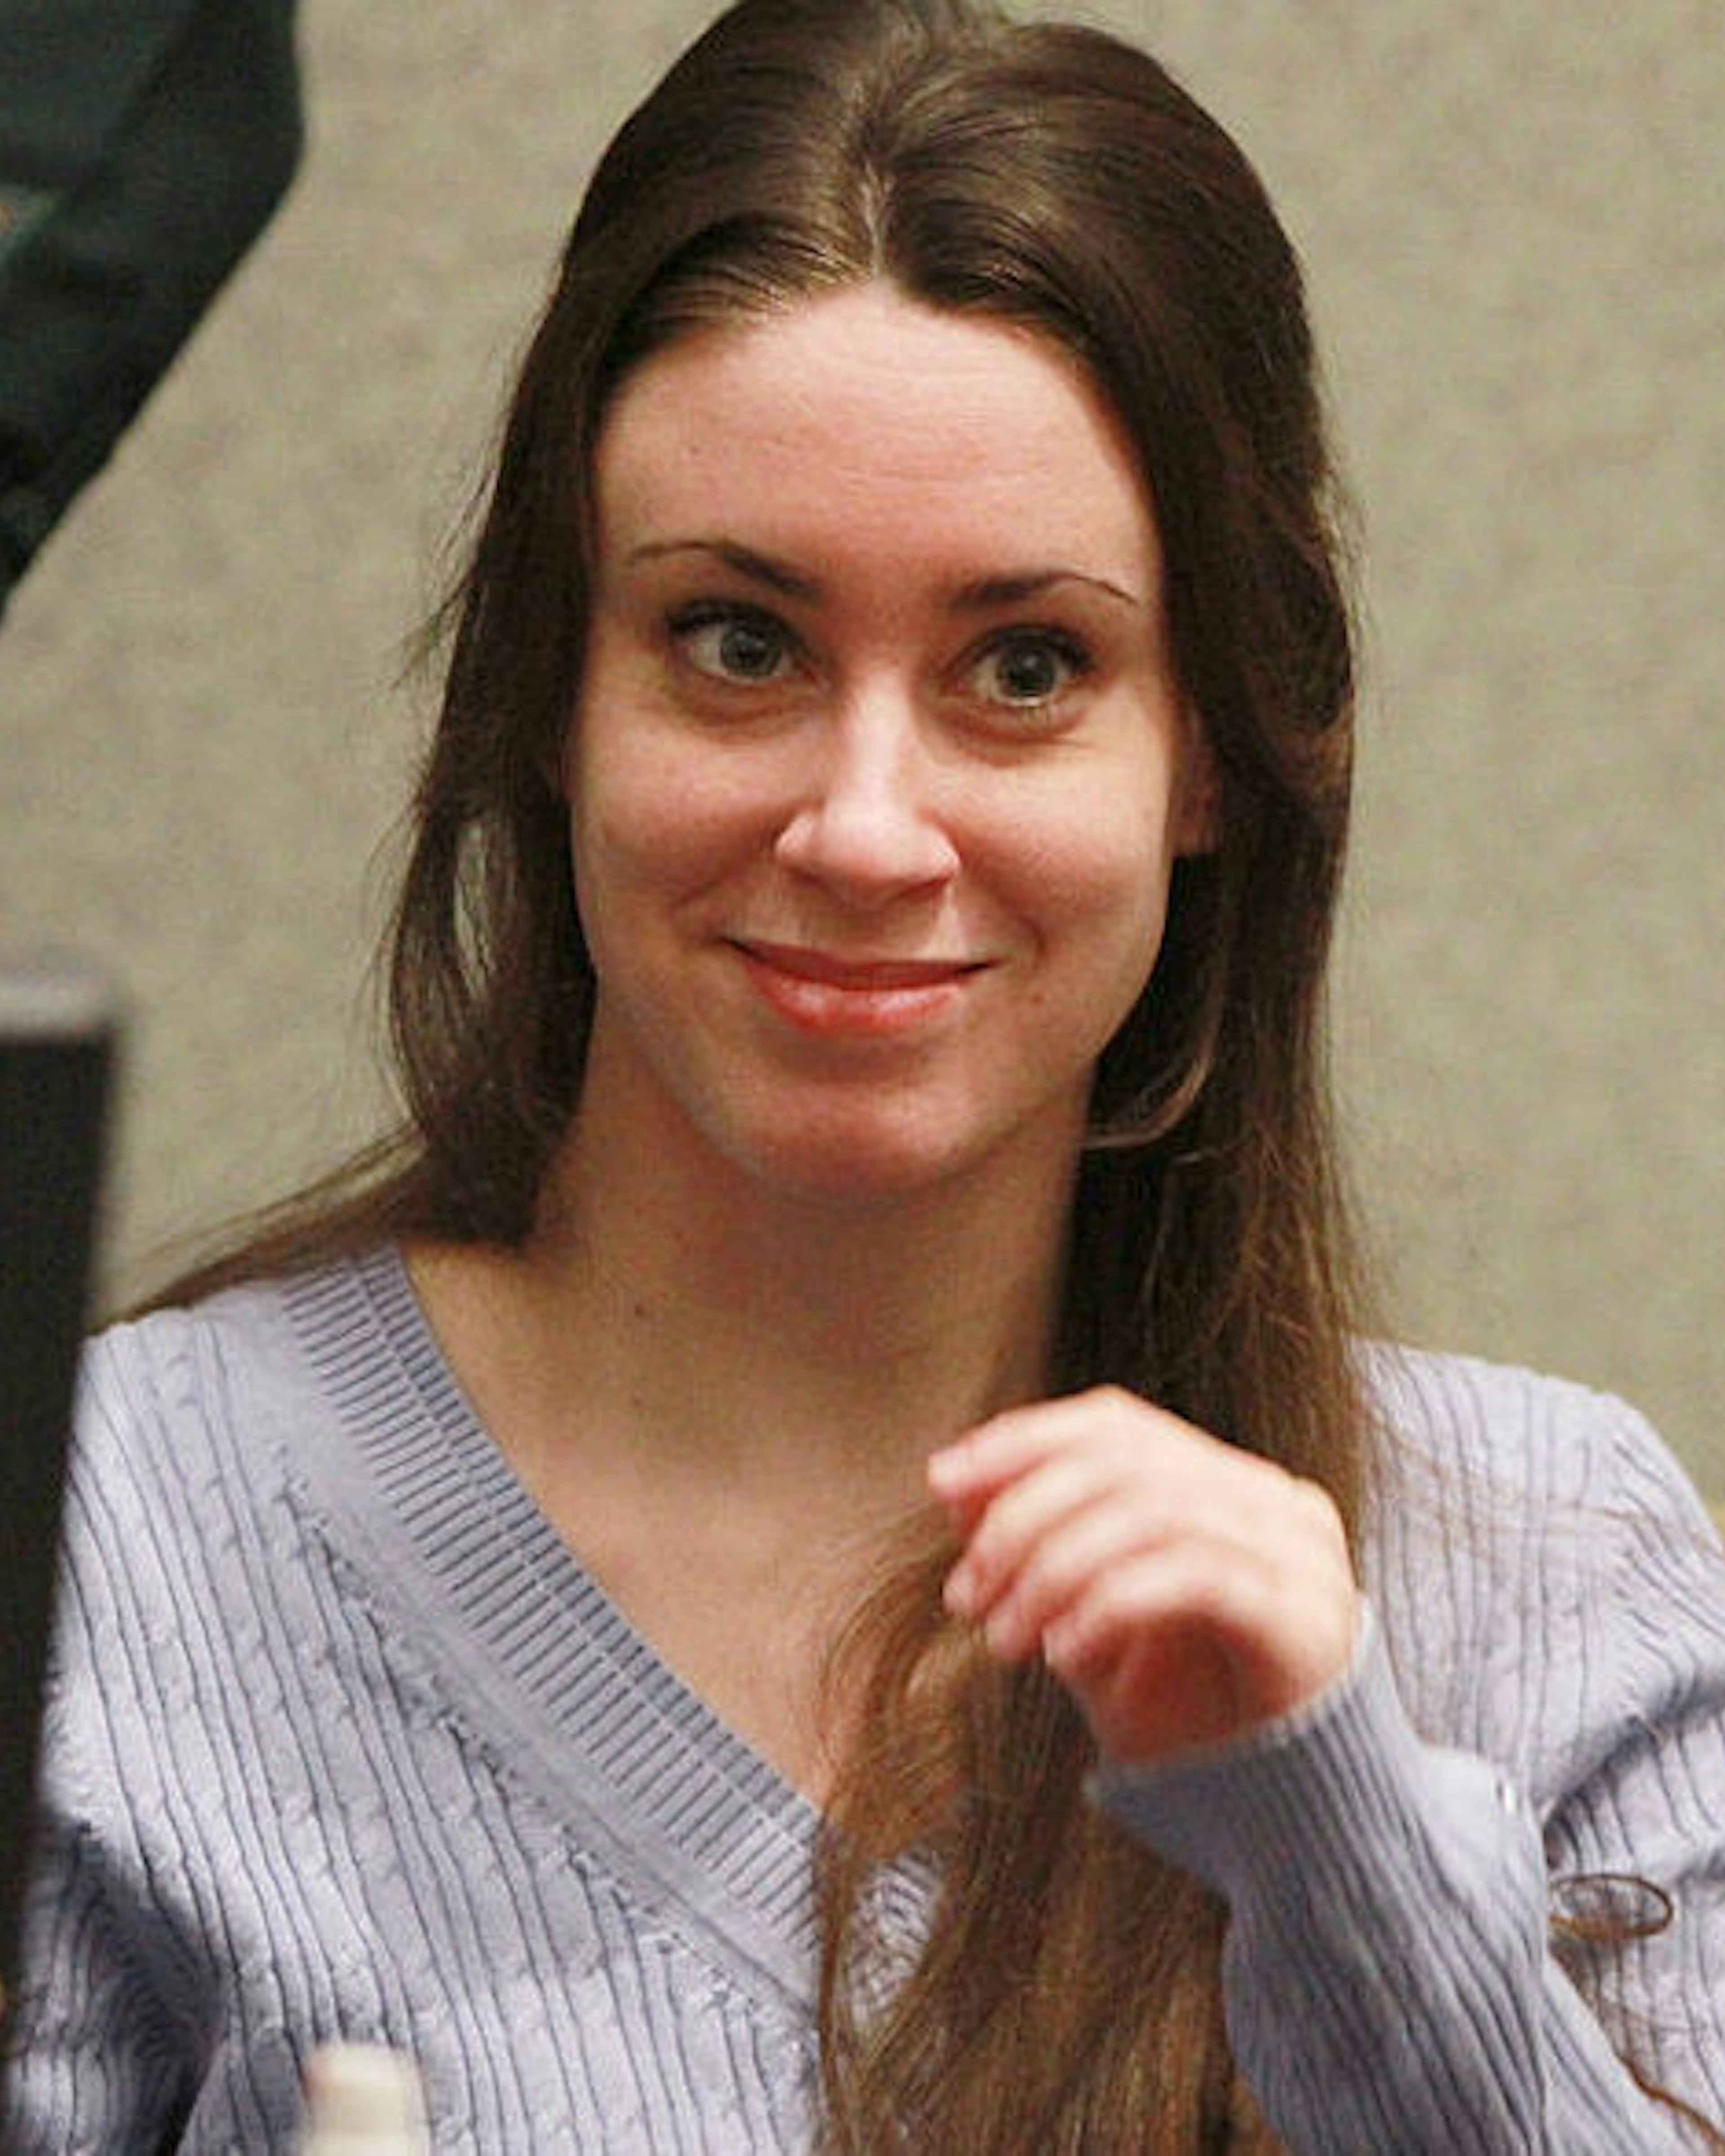 Casey Anthony smiles before the start of her sentencing hearing on charges of lying to a law enforcement officer at the Orange County Courthouse July 7, 2011 in Orlando, Florida.